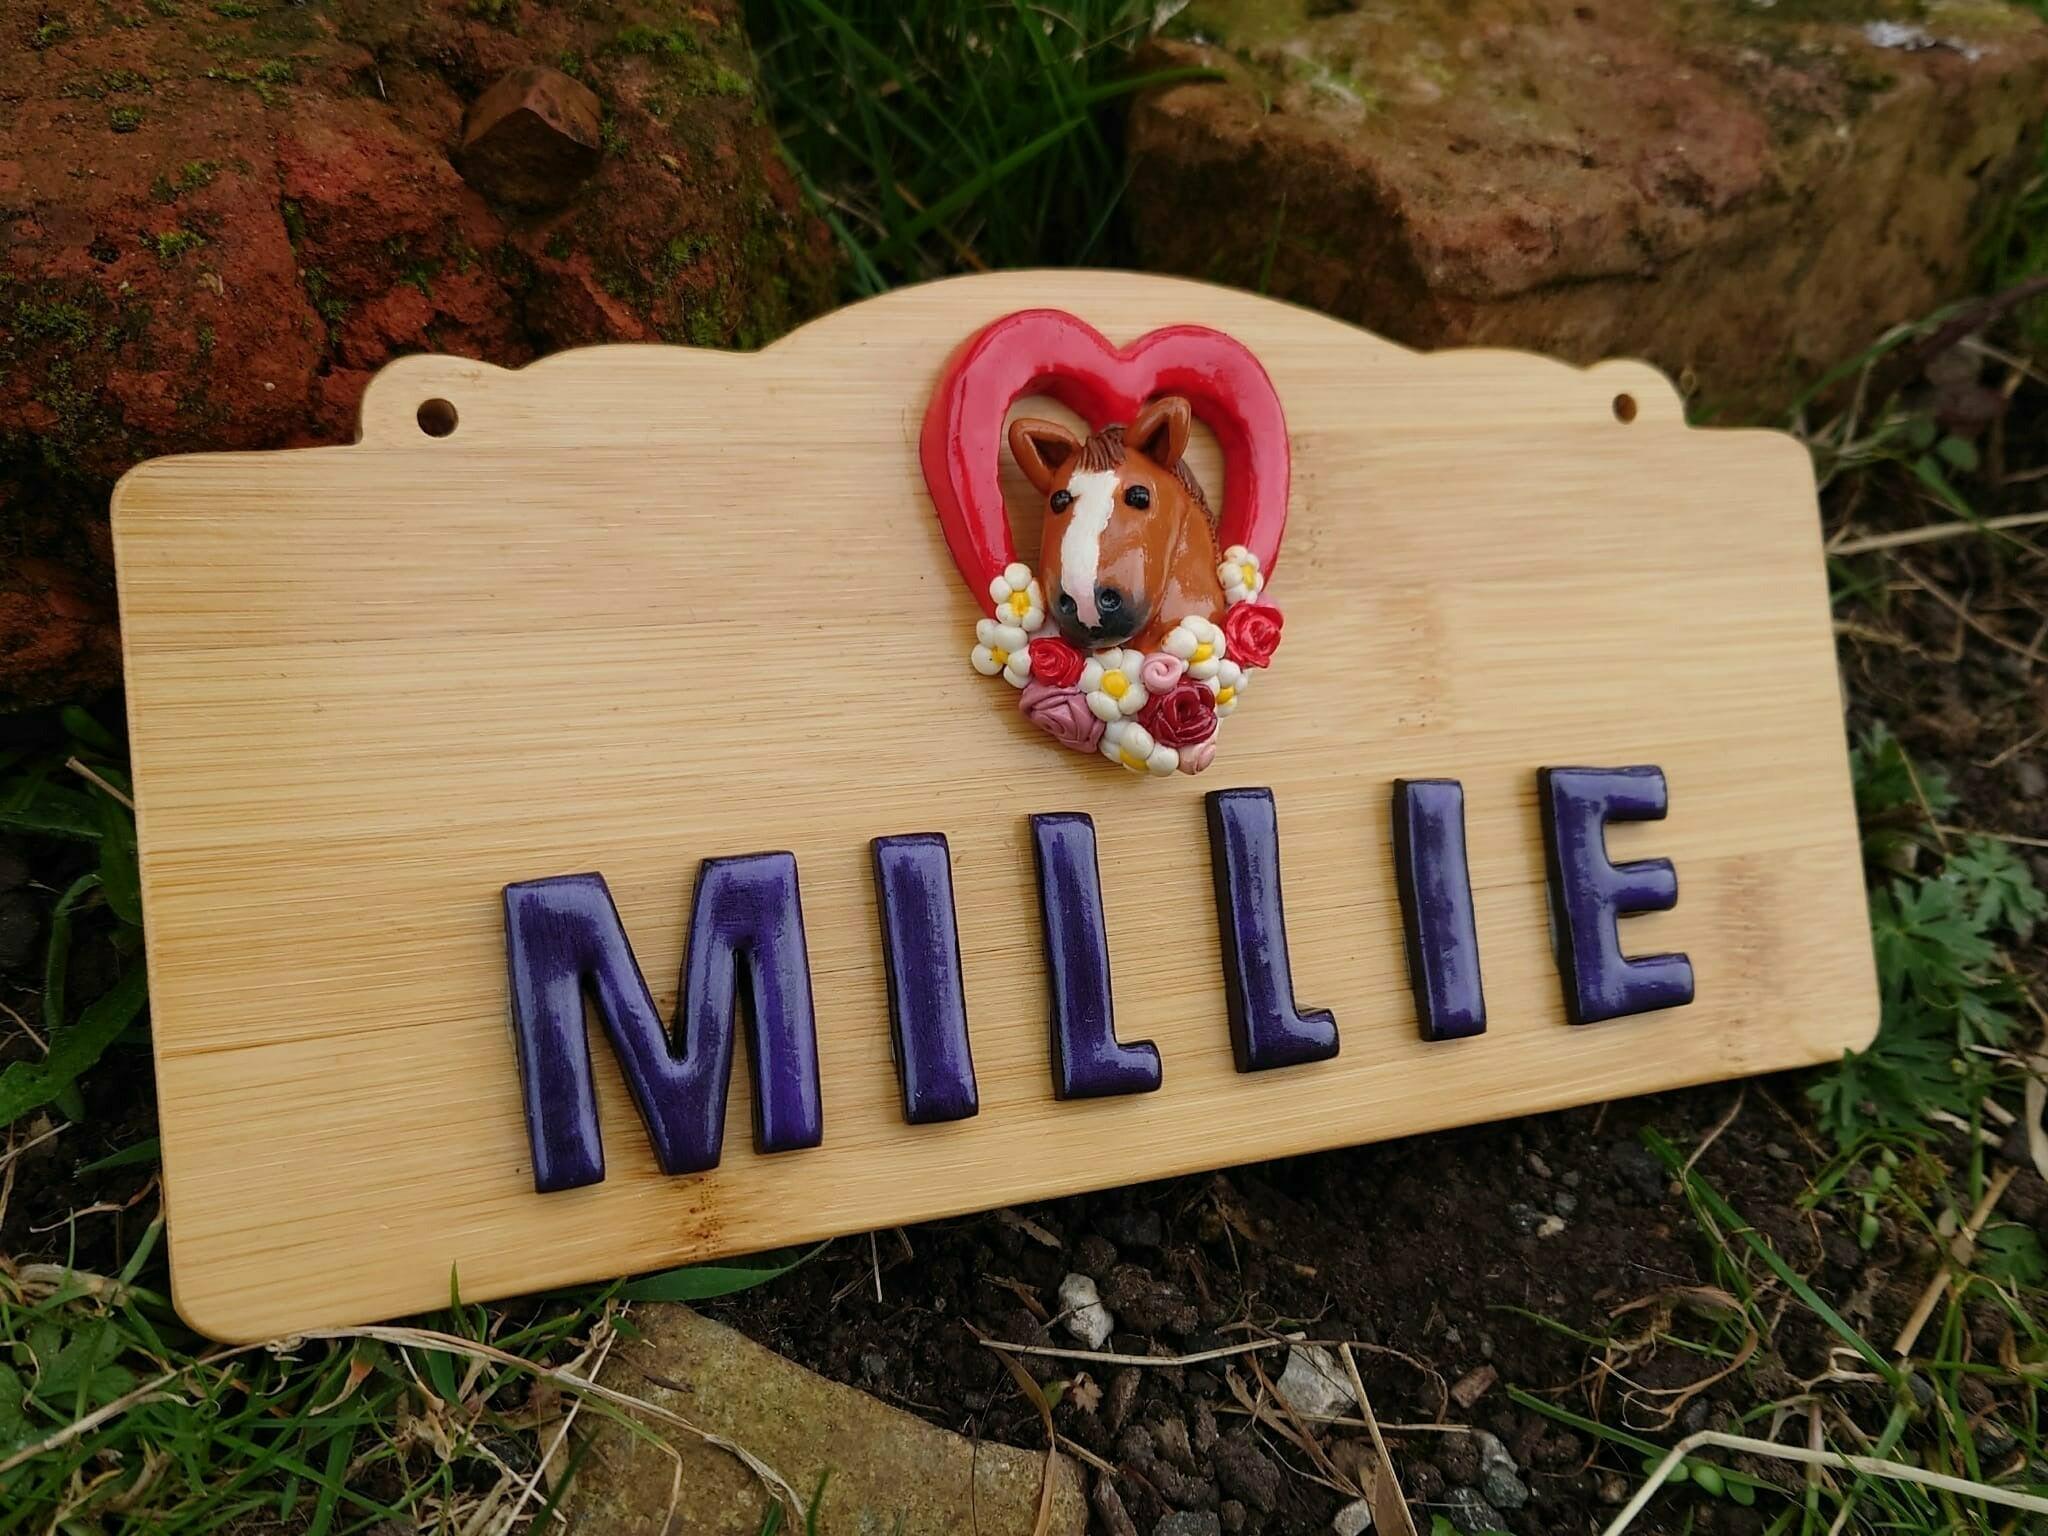 Daisy-Chain Equestrian Personalised Stable Door Plaque